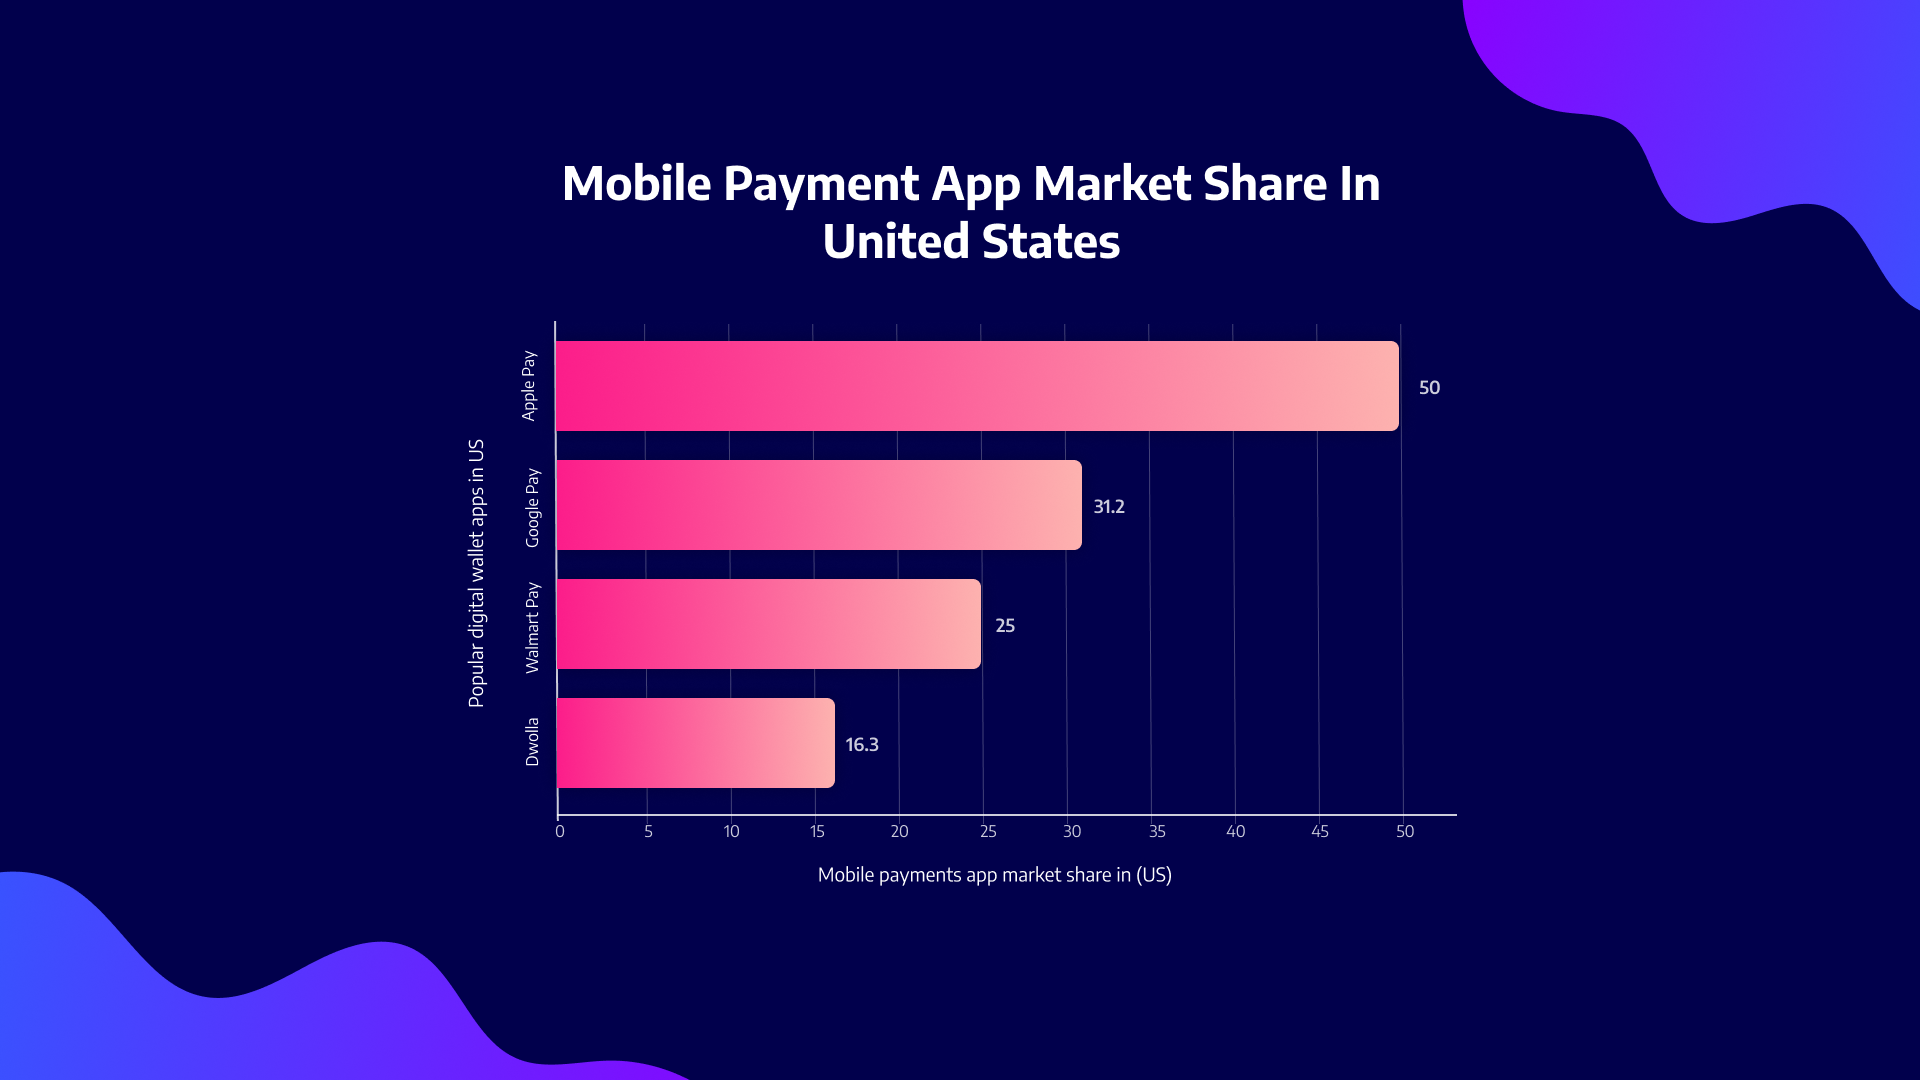 Mobile Payment App Market Share in United States 